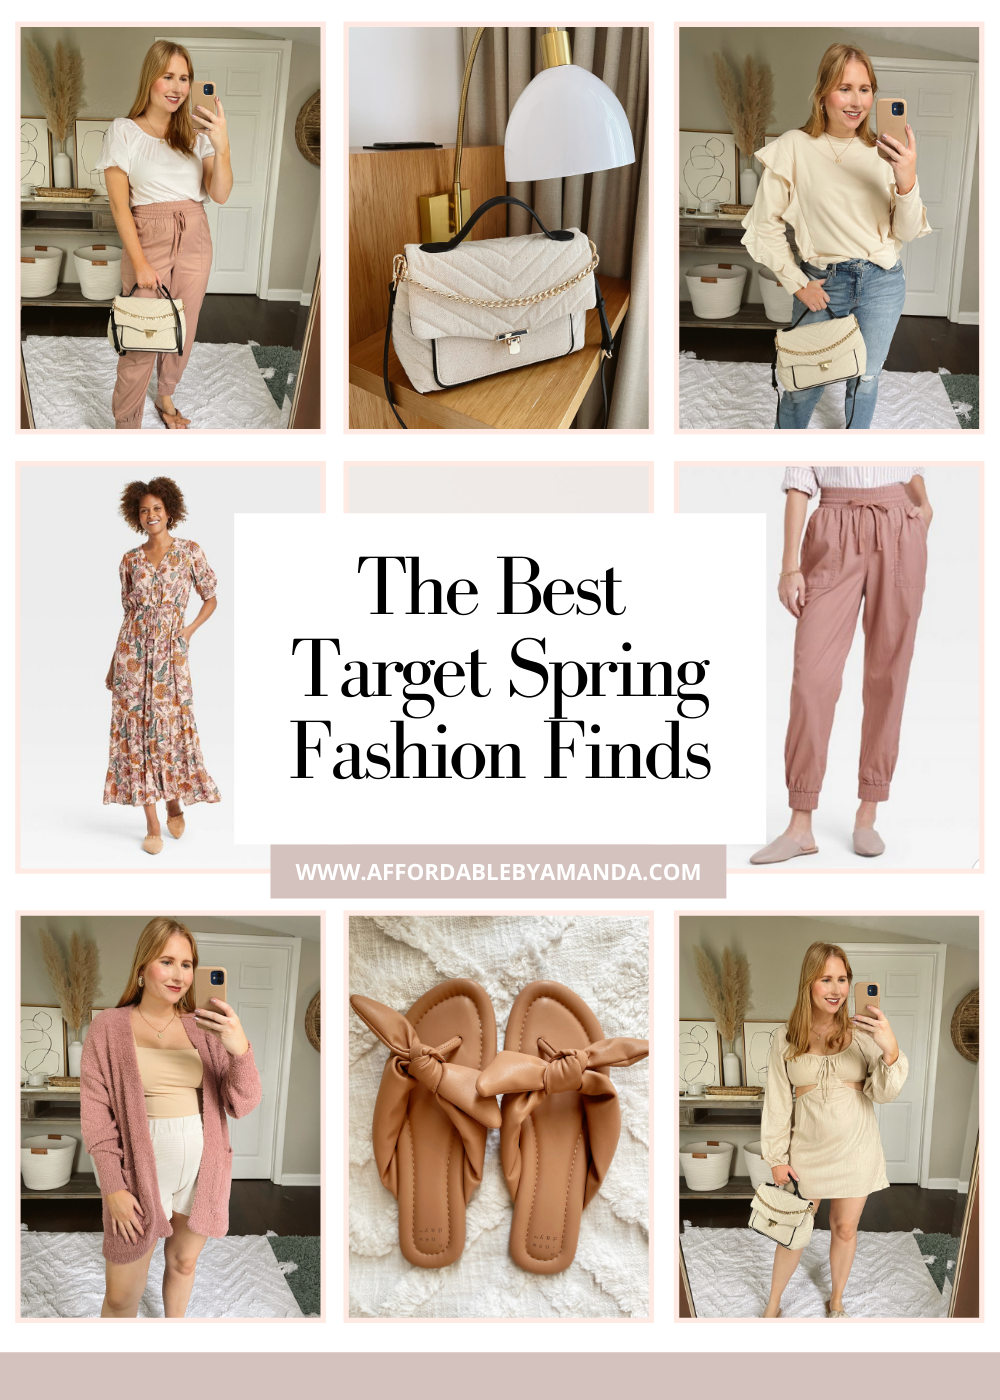 The Best Target Spring Fashion Finds - Affordable by Amanda